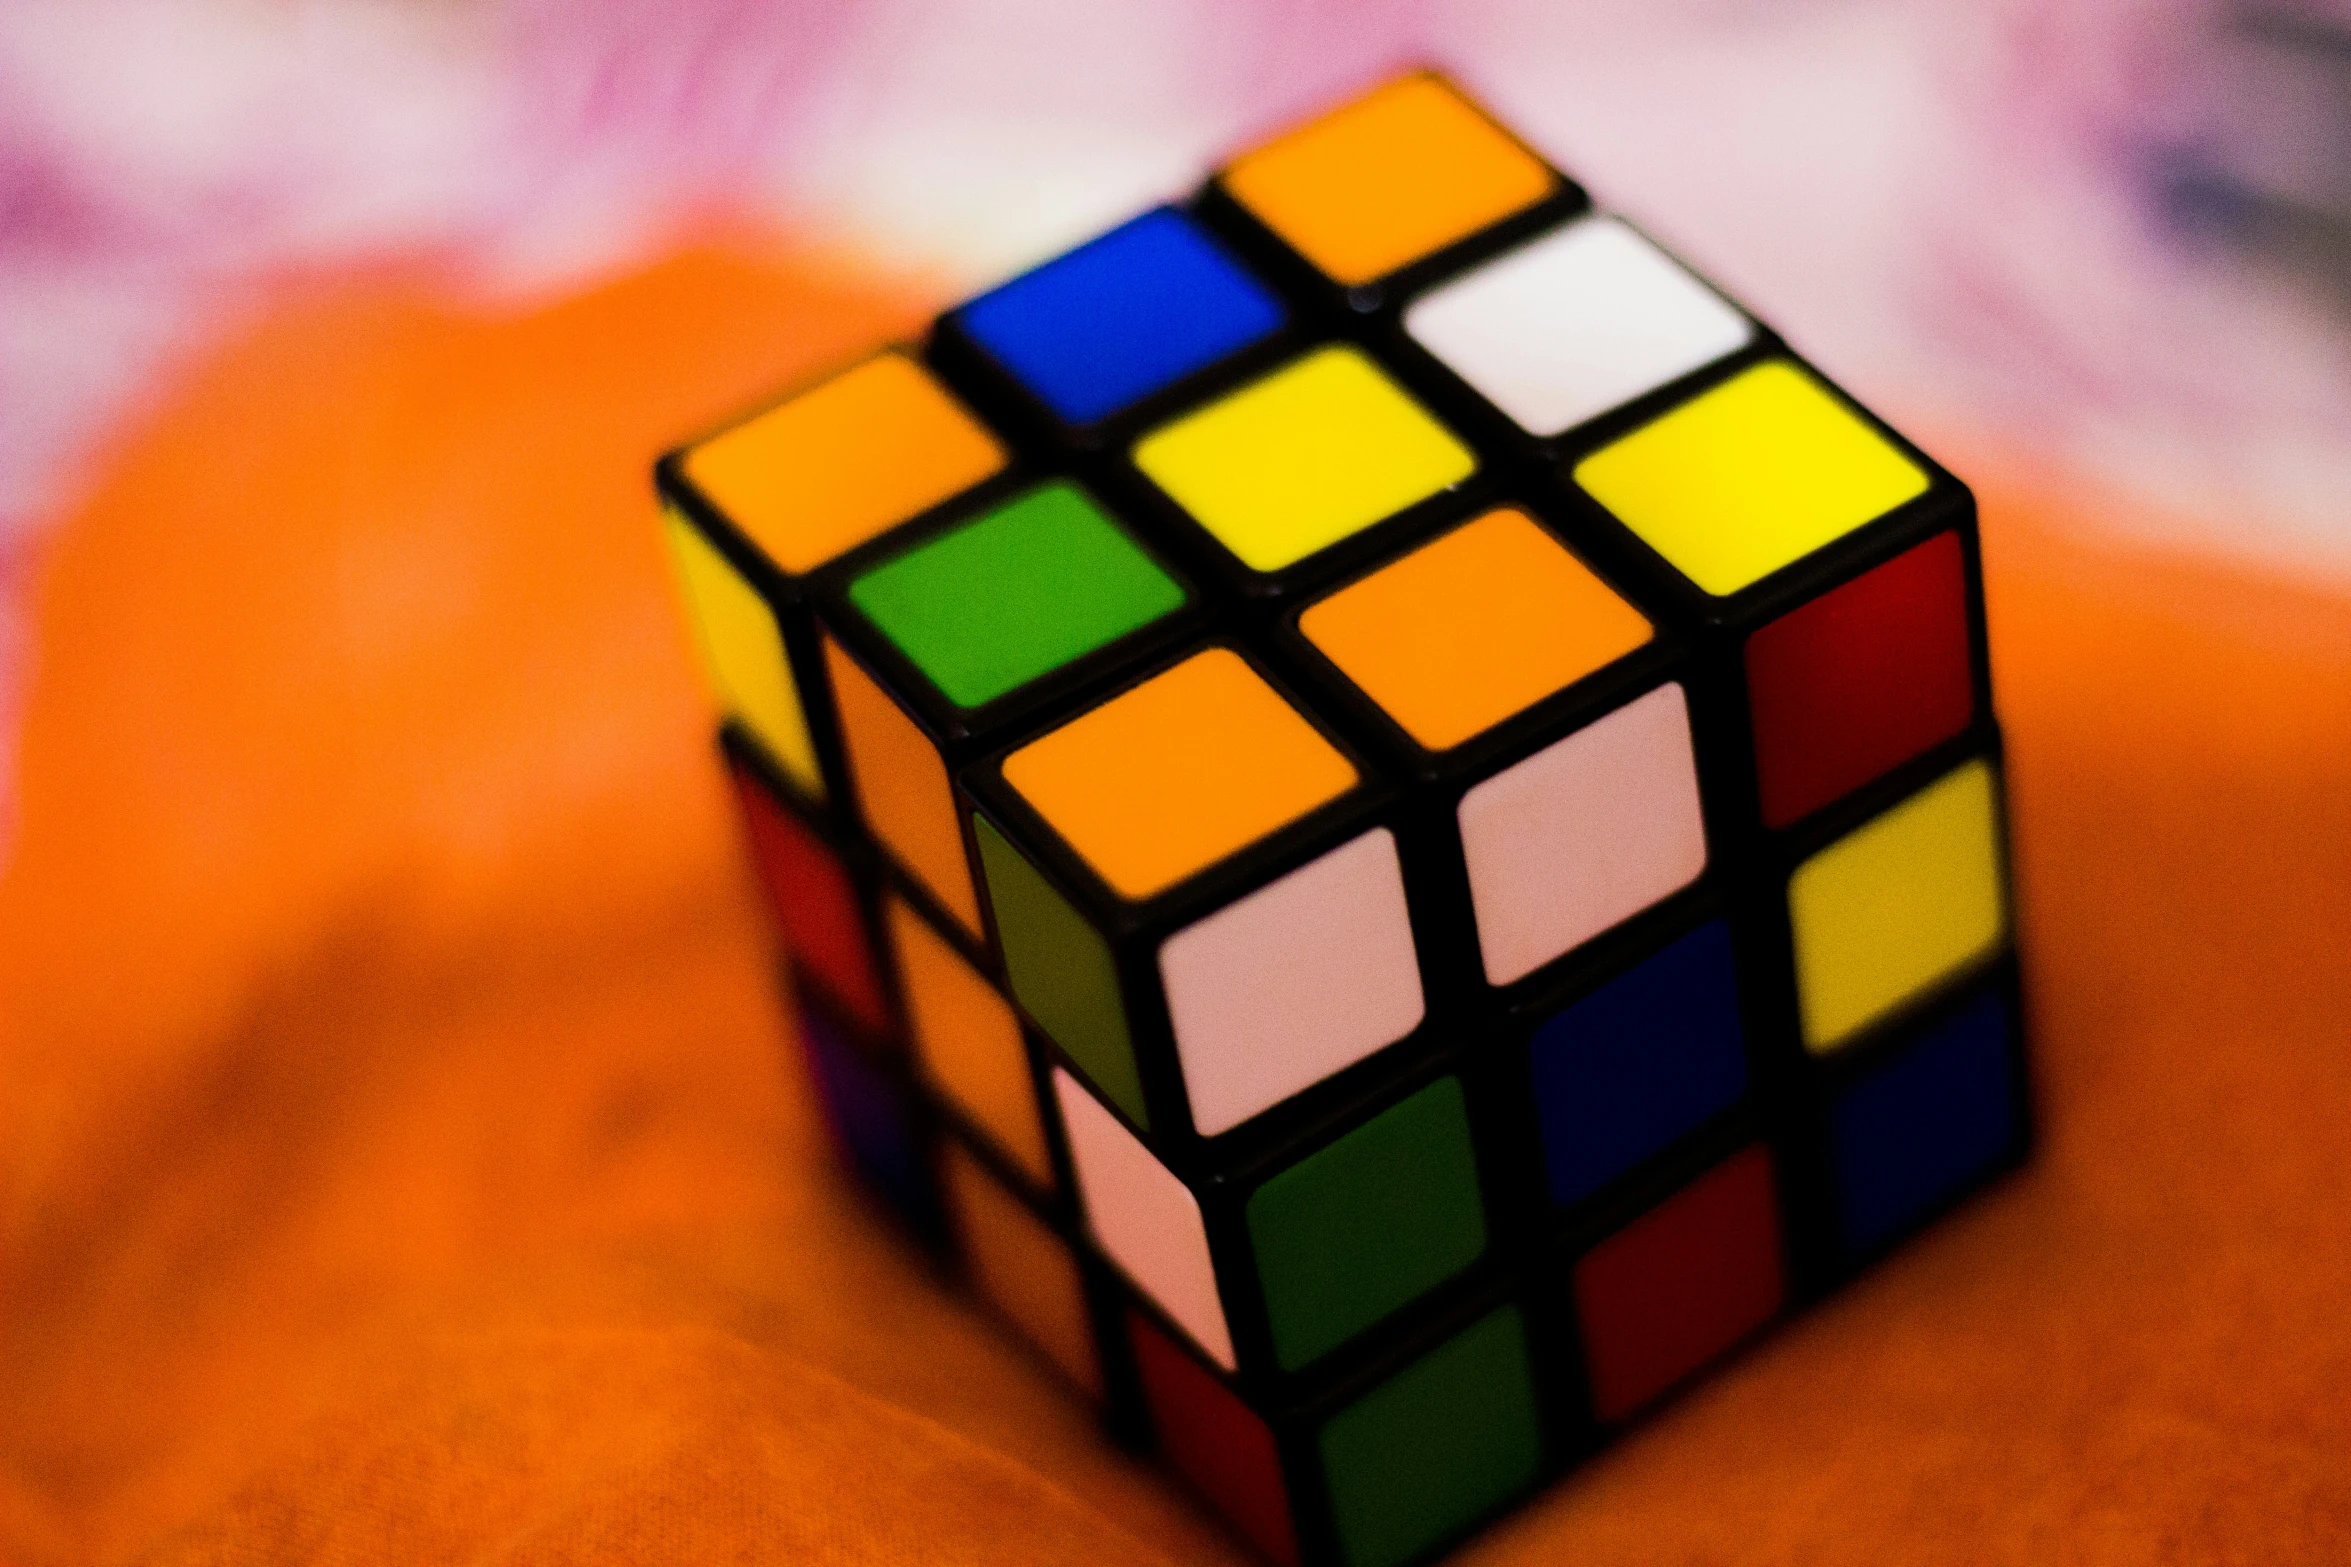 colorful cube sitting on orange surface with blurred background